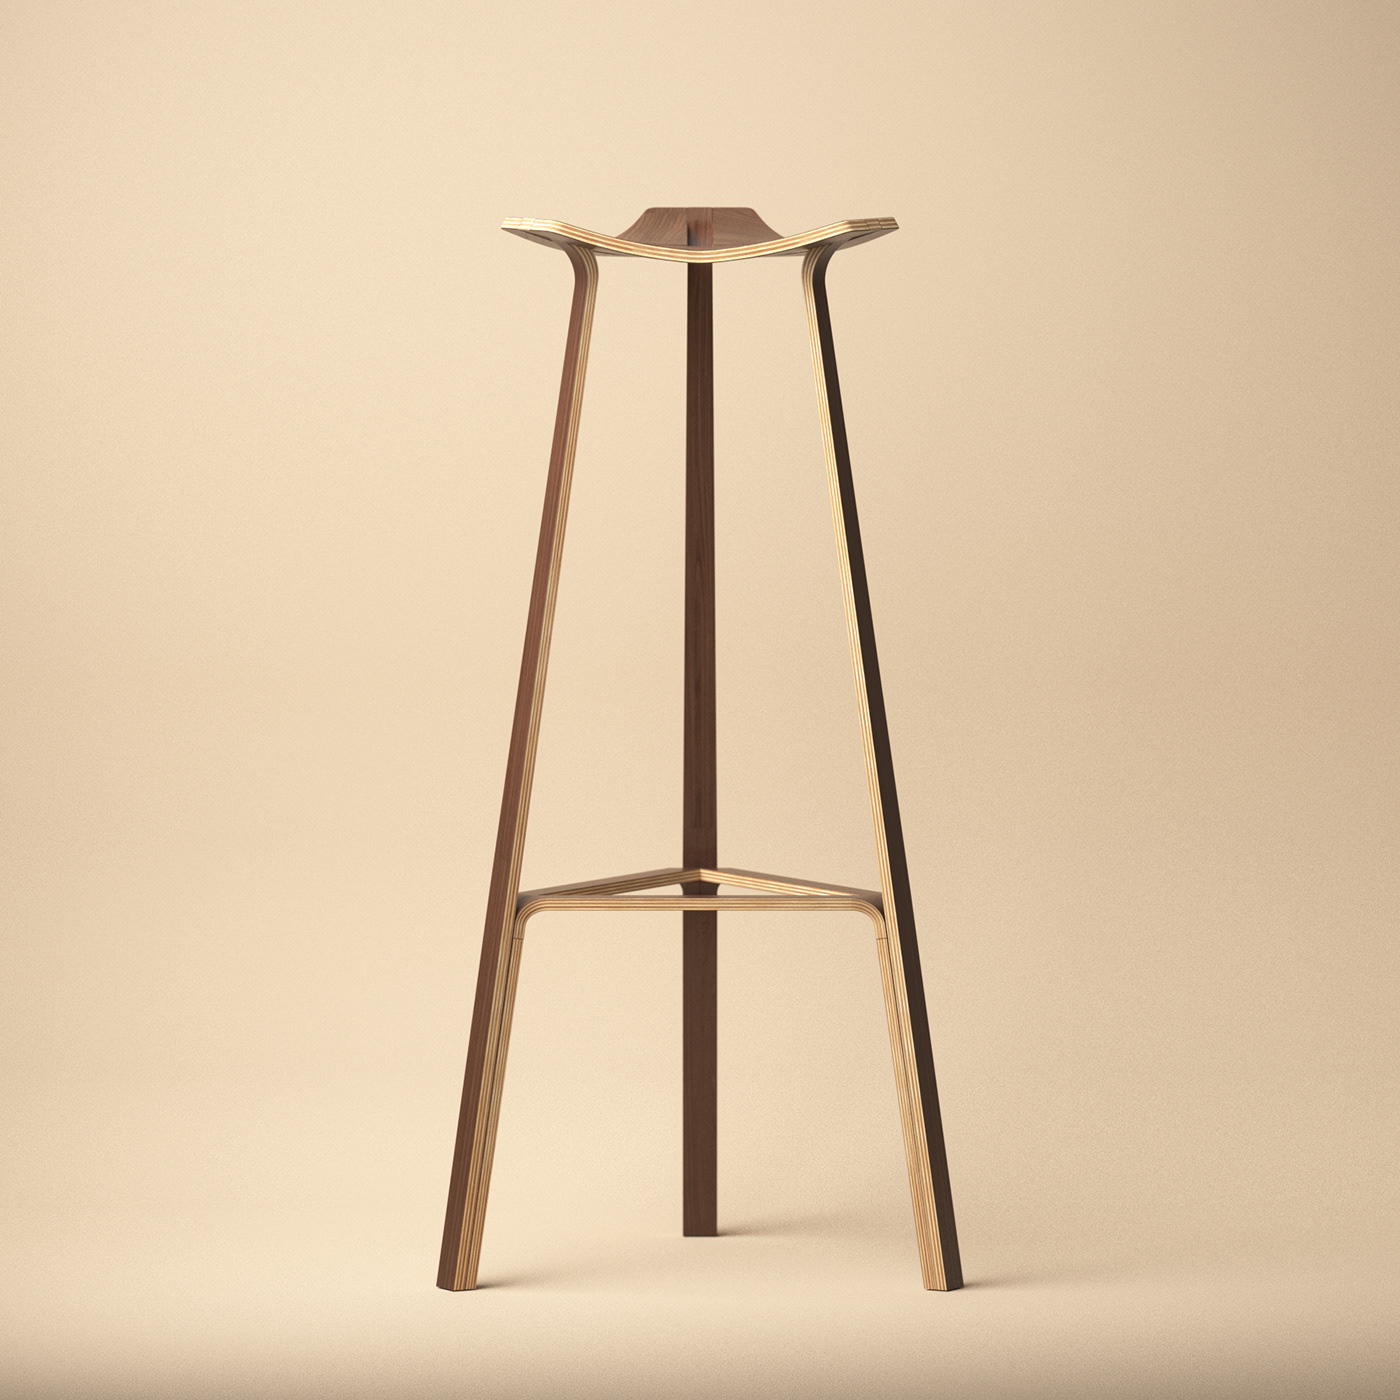 barstool chair furniture Interior object plywood product stool stools wood